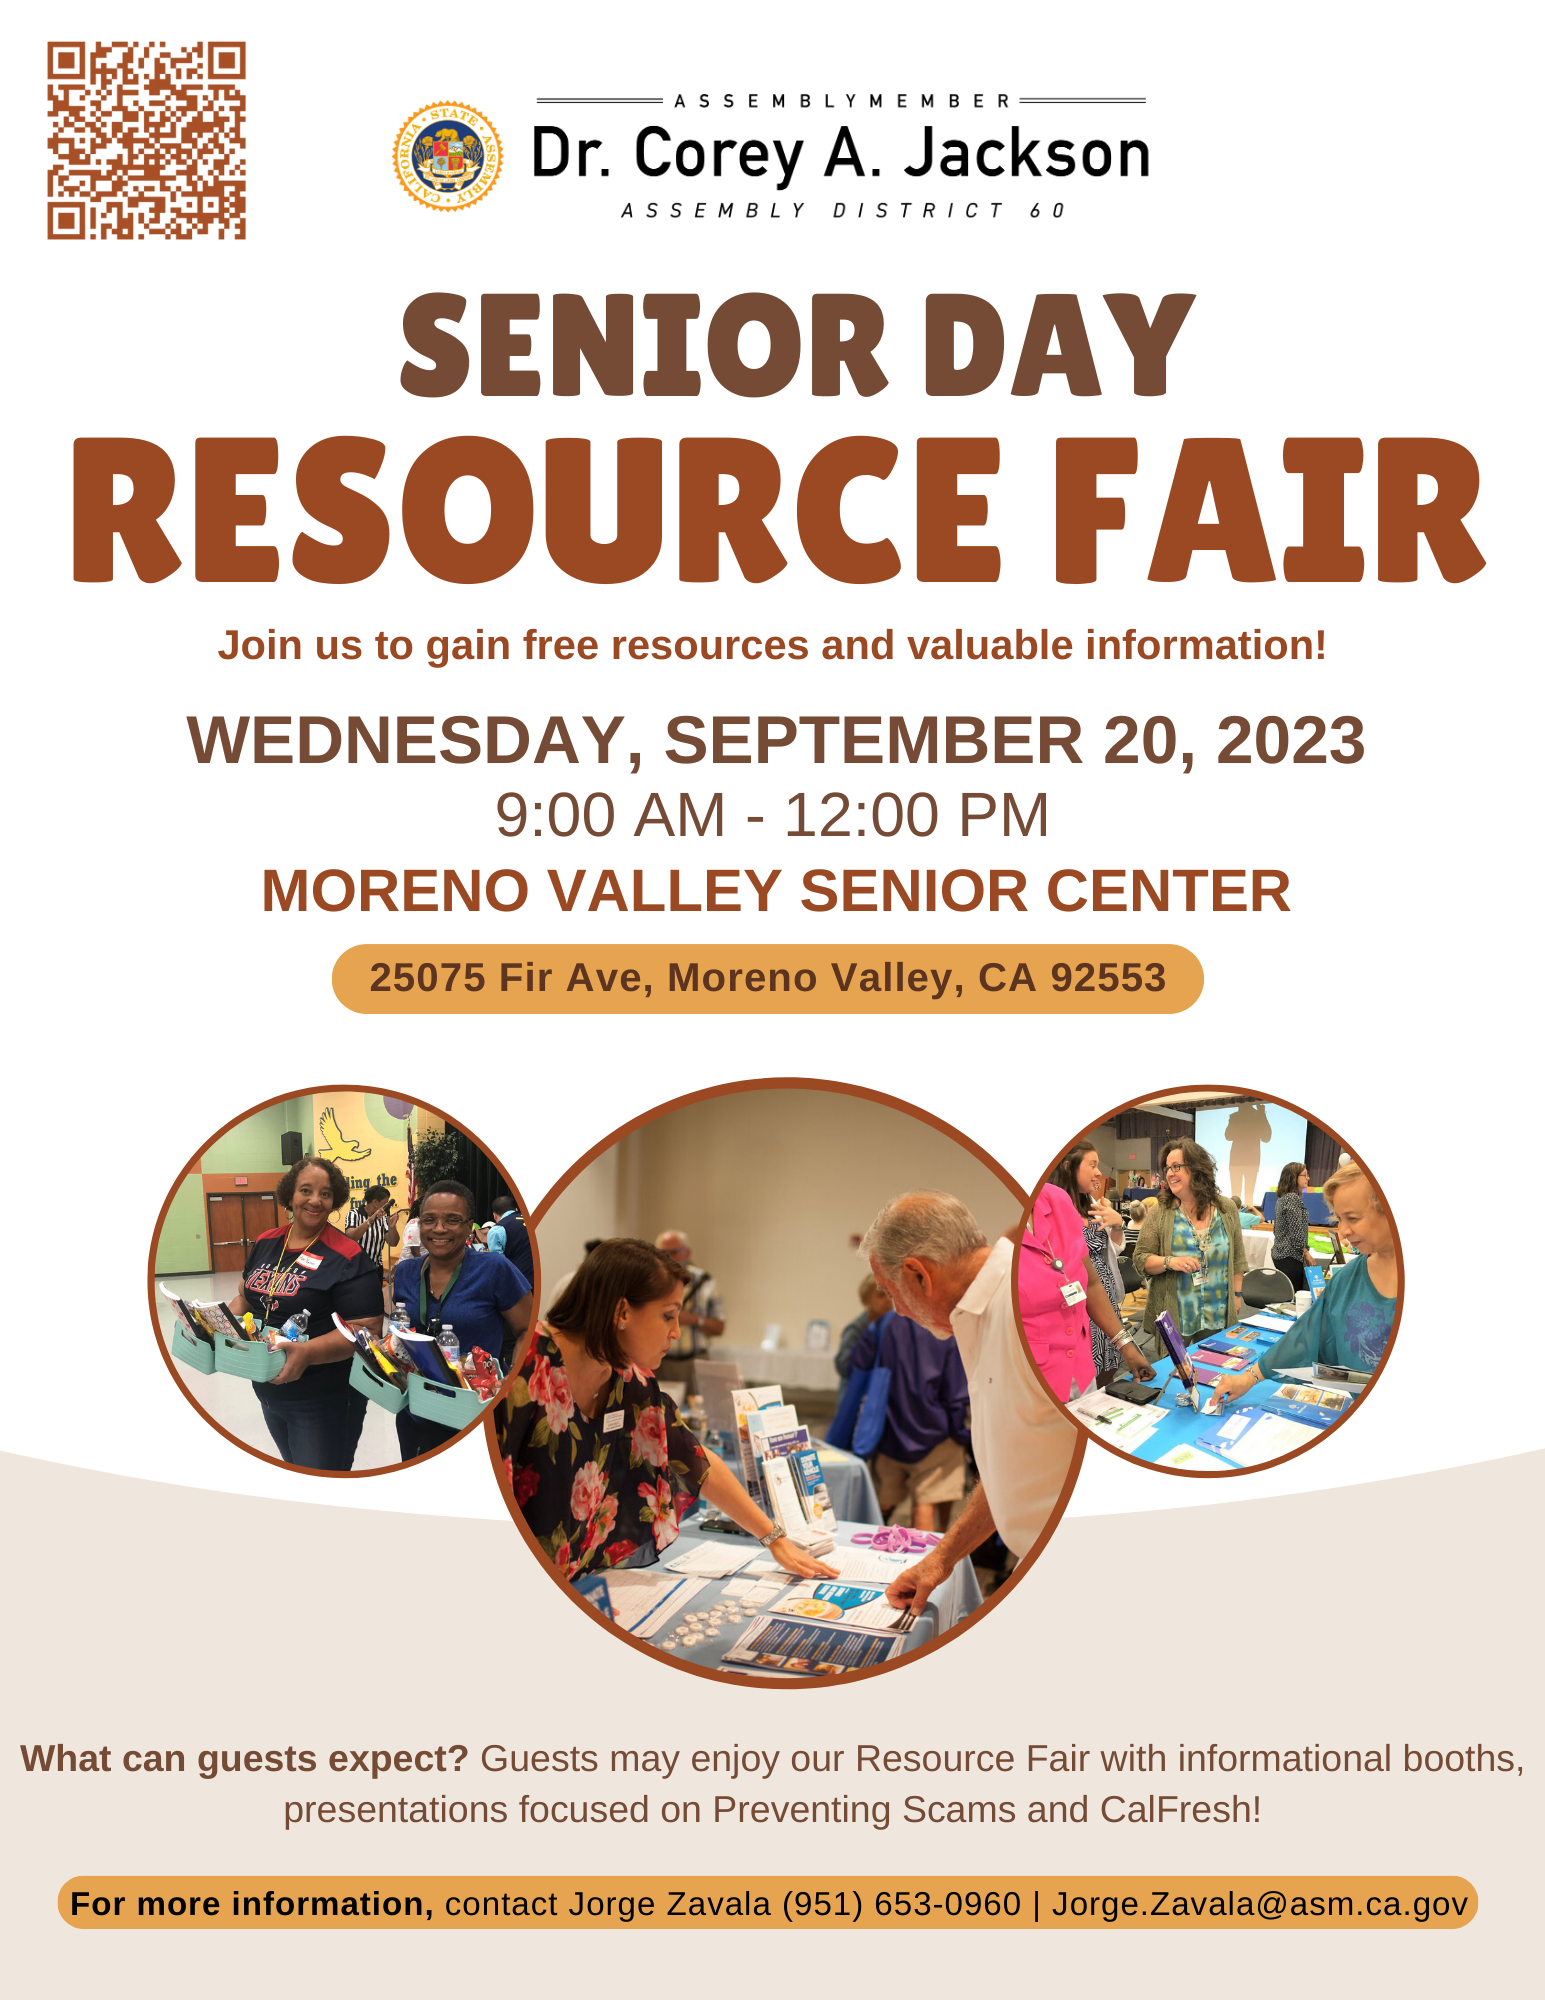 Senior Day Resource Fair Flyer, with event details and photos of seniors at resource fair.